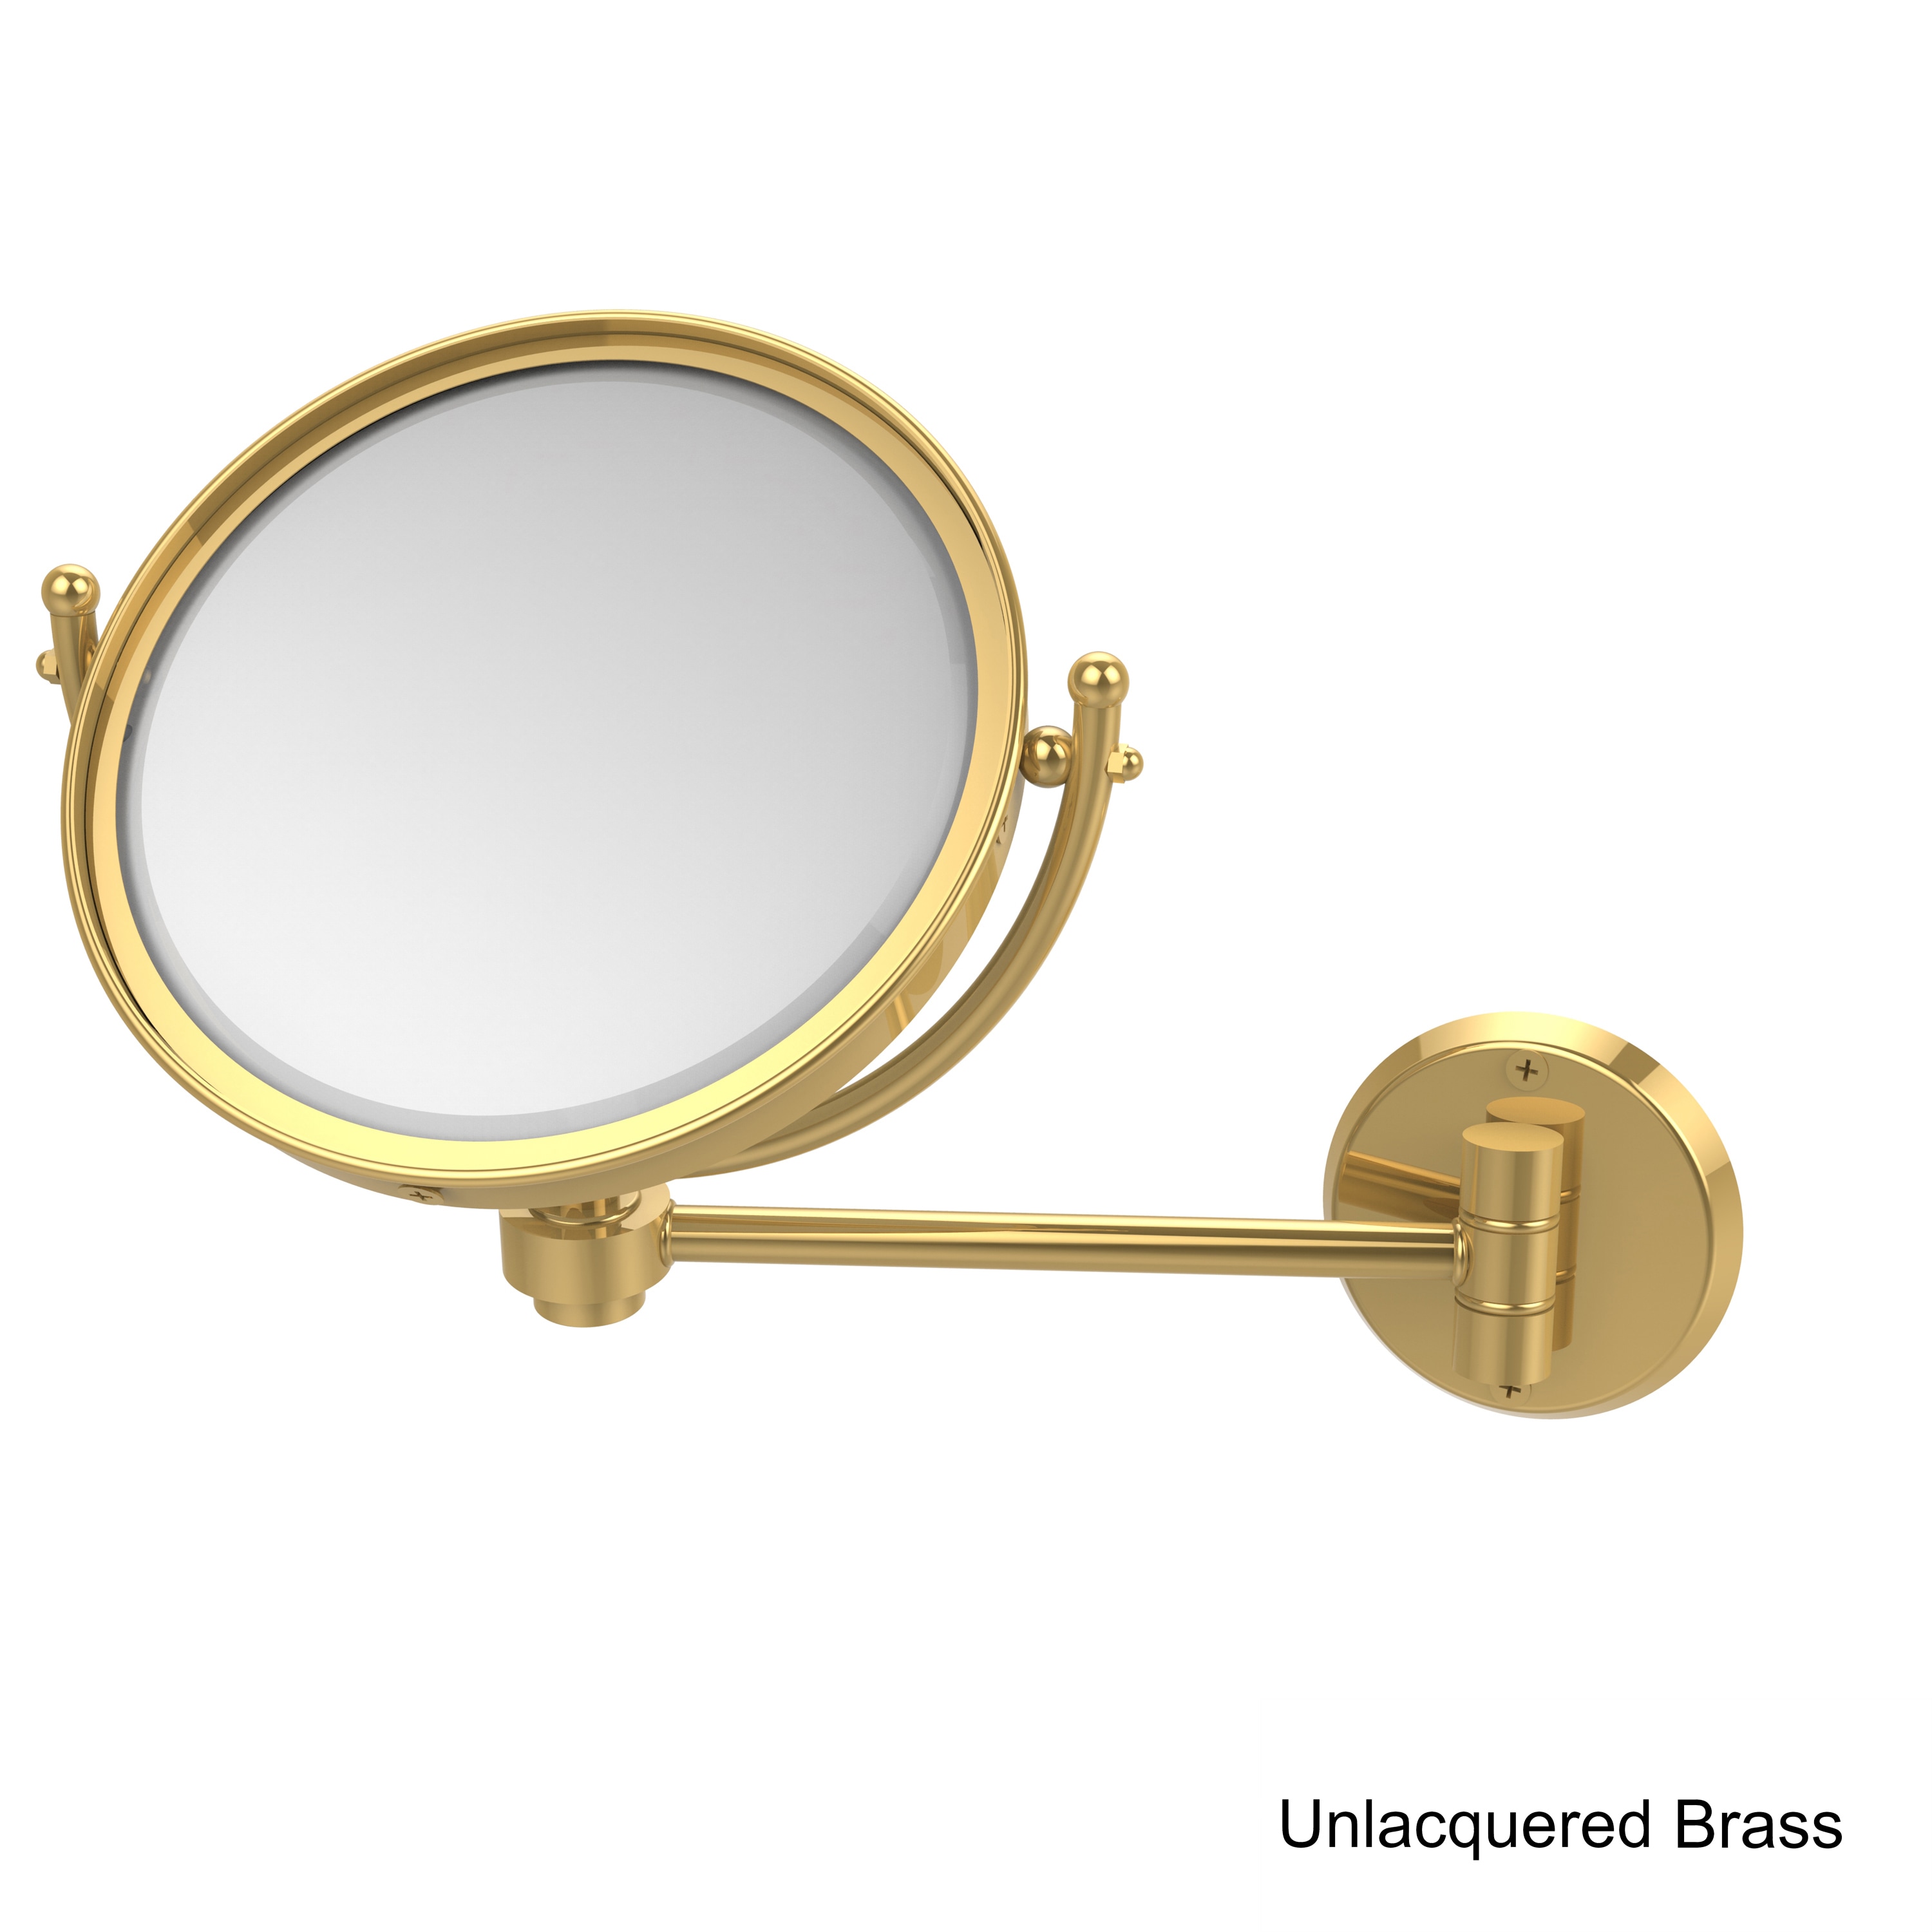 Allied Brass Shop Home Furnishings at